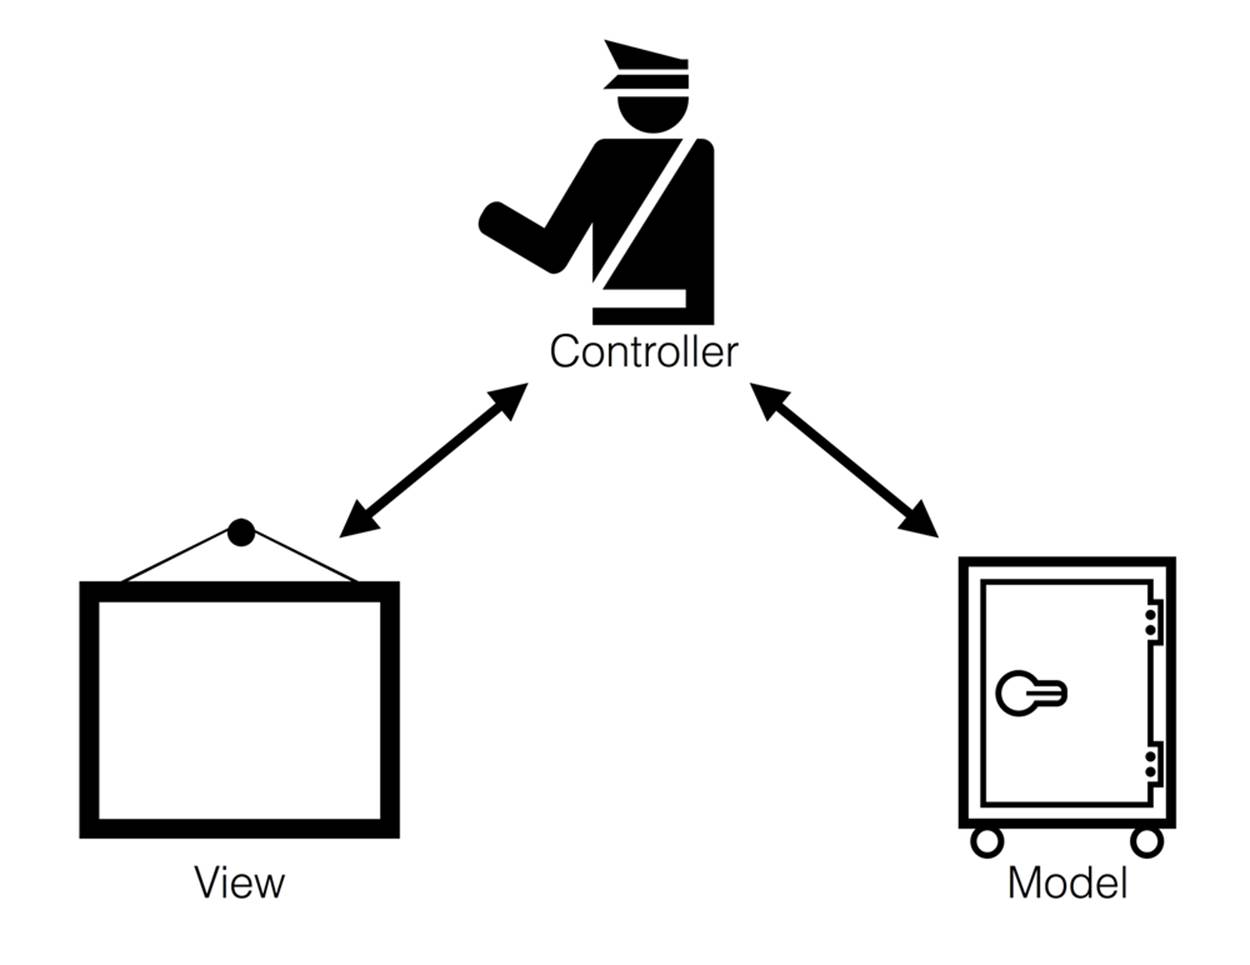 Overview of Model-View-Controller